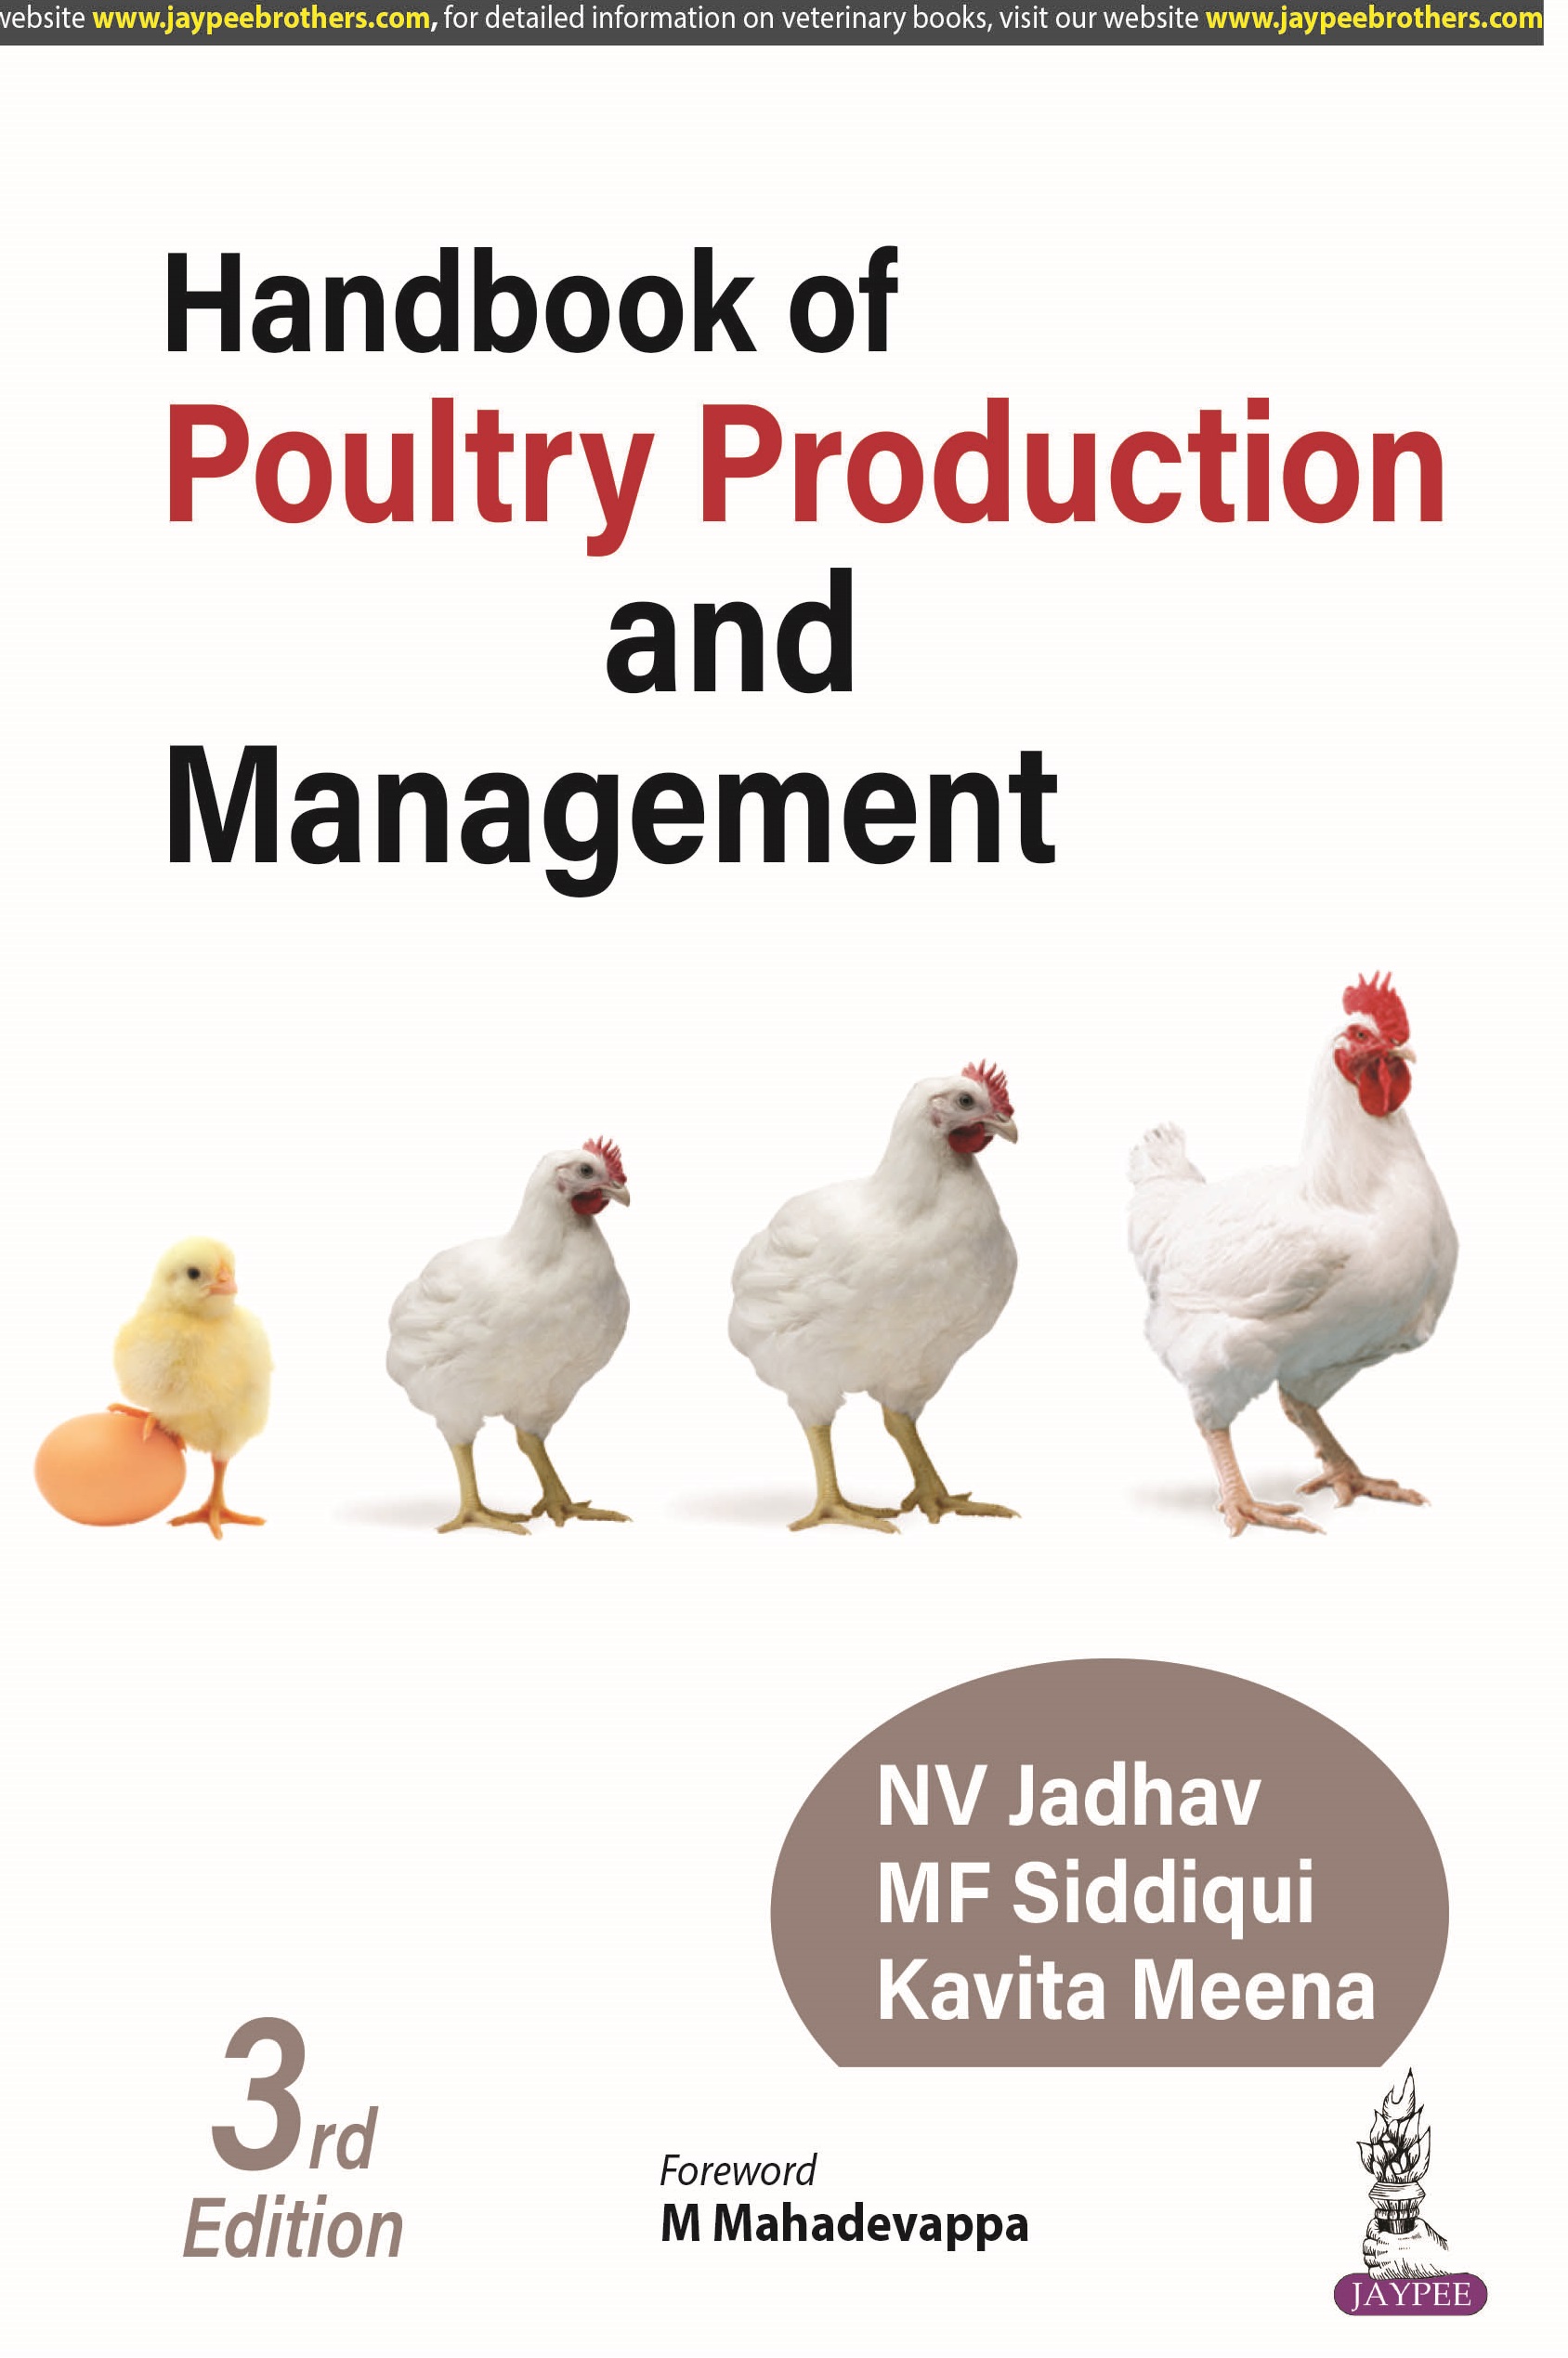 Handbook of Poultry Production and Management 3rd Edition